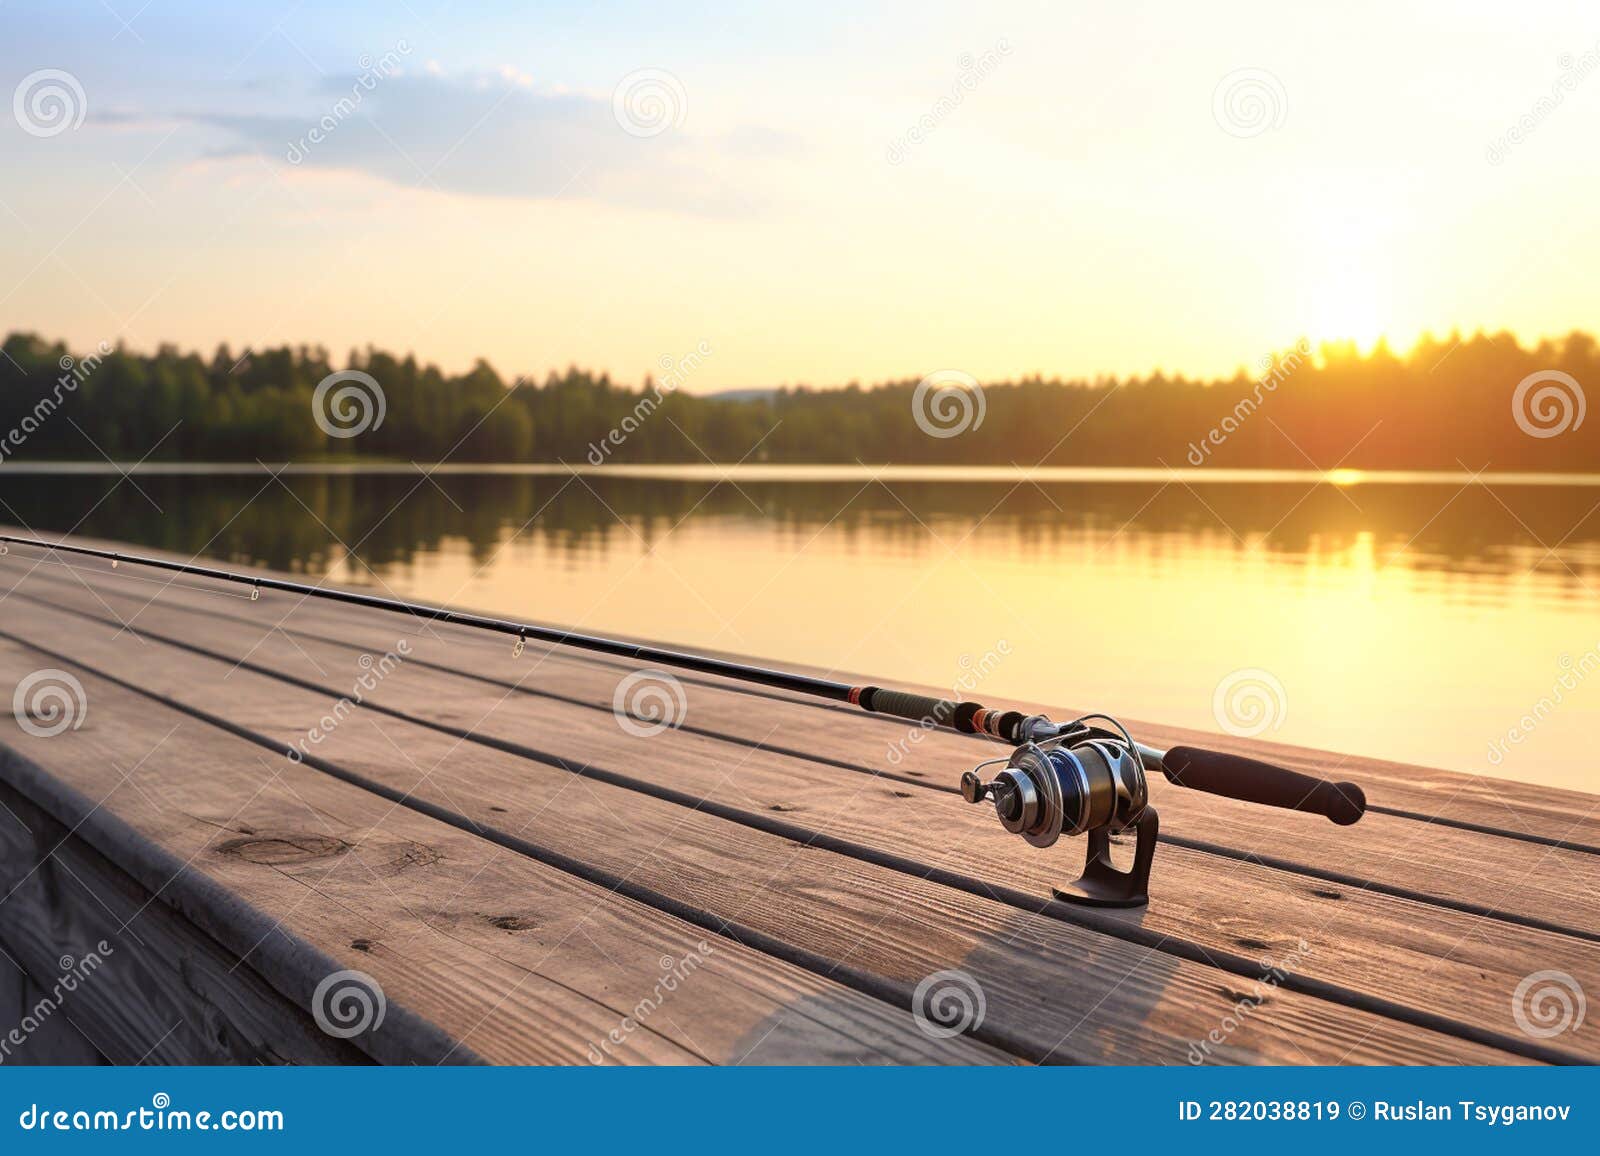 Fishing in the River on a Wooden Pier. Fishing Rod with a Holder